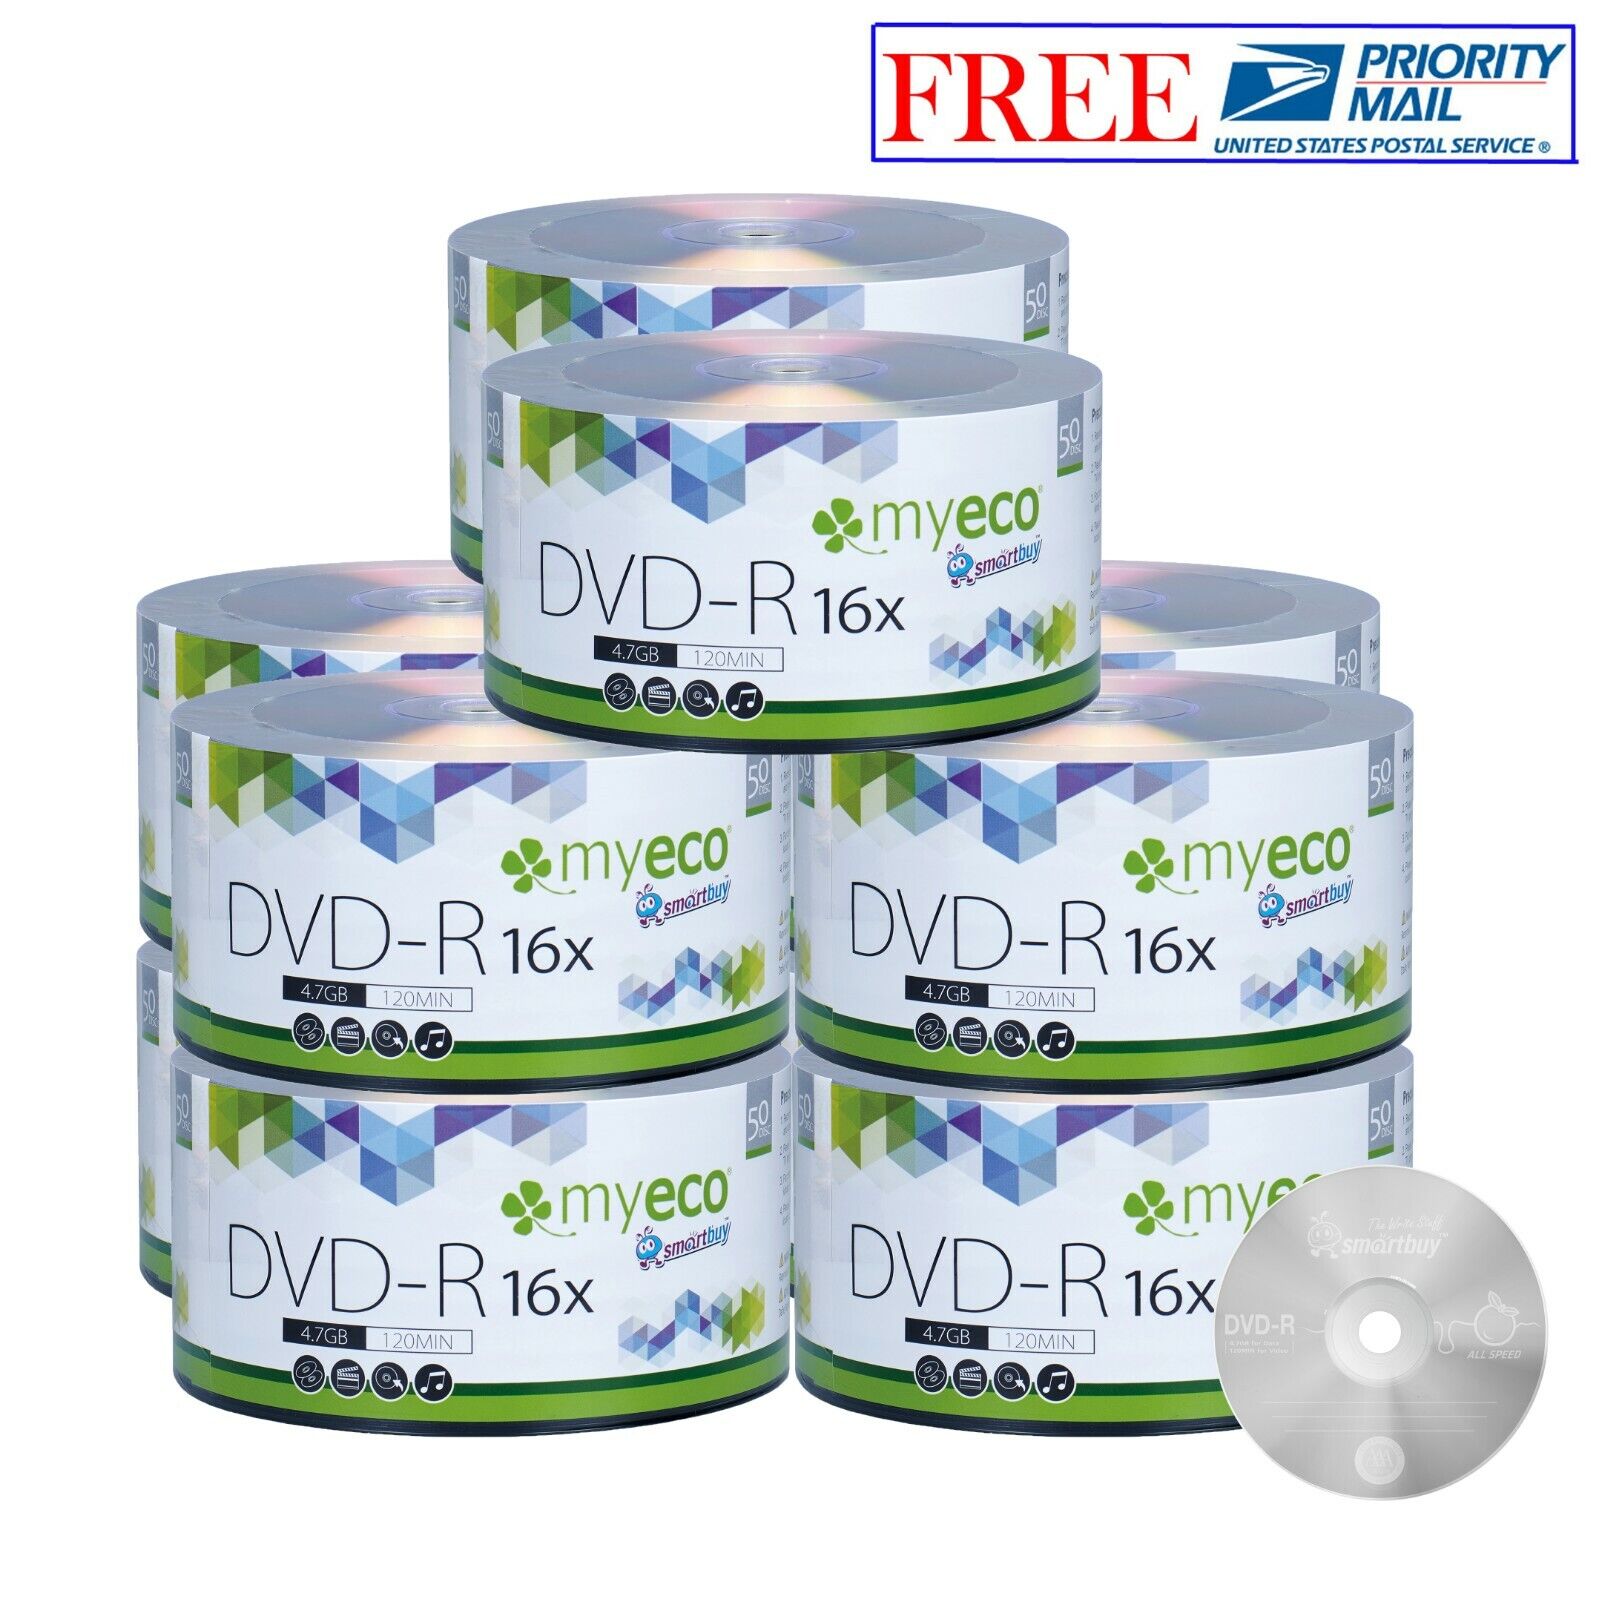 500 Pack MyEco DVD-R DVDR 16X 4.7GB Economy Branded Logo Blank Recordable Disc